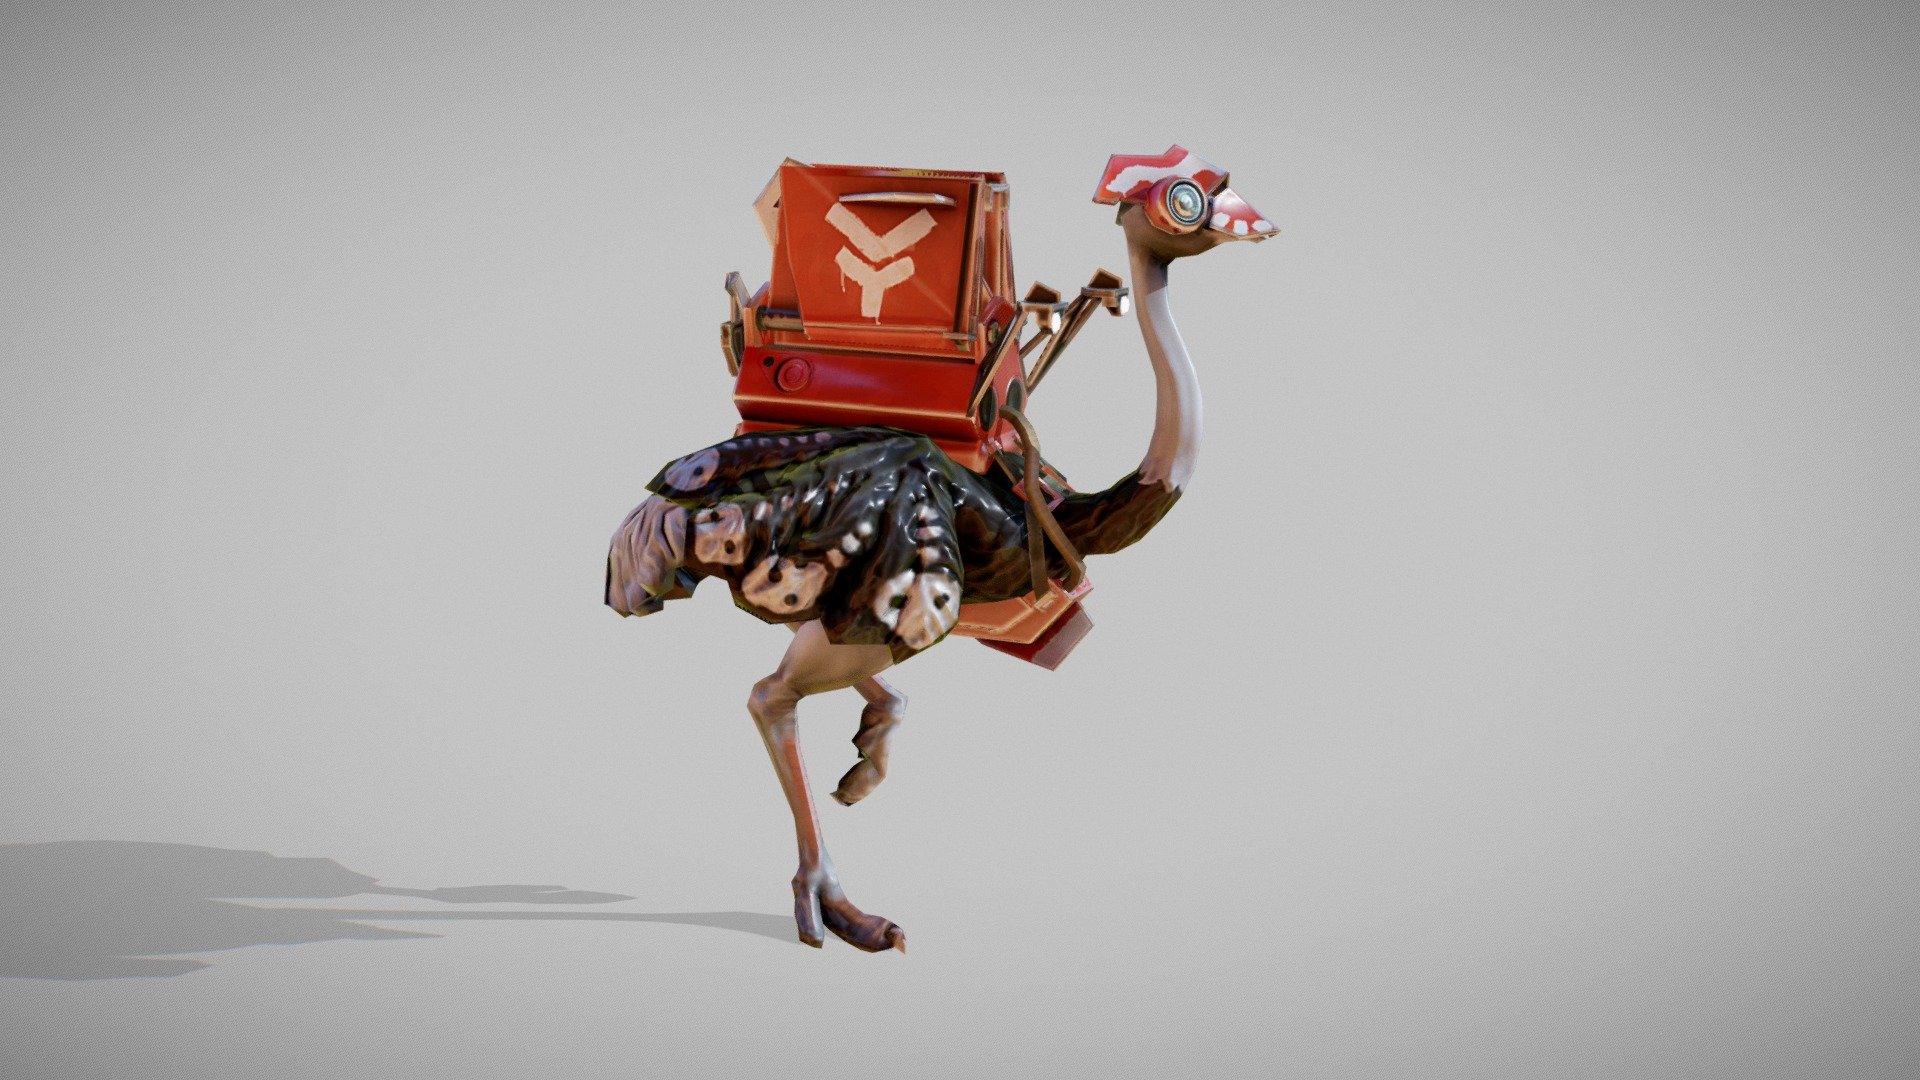 This is a Dota 2 courier 3d model